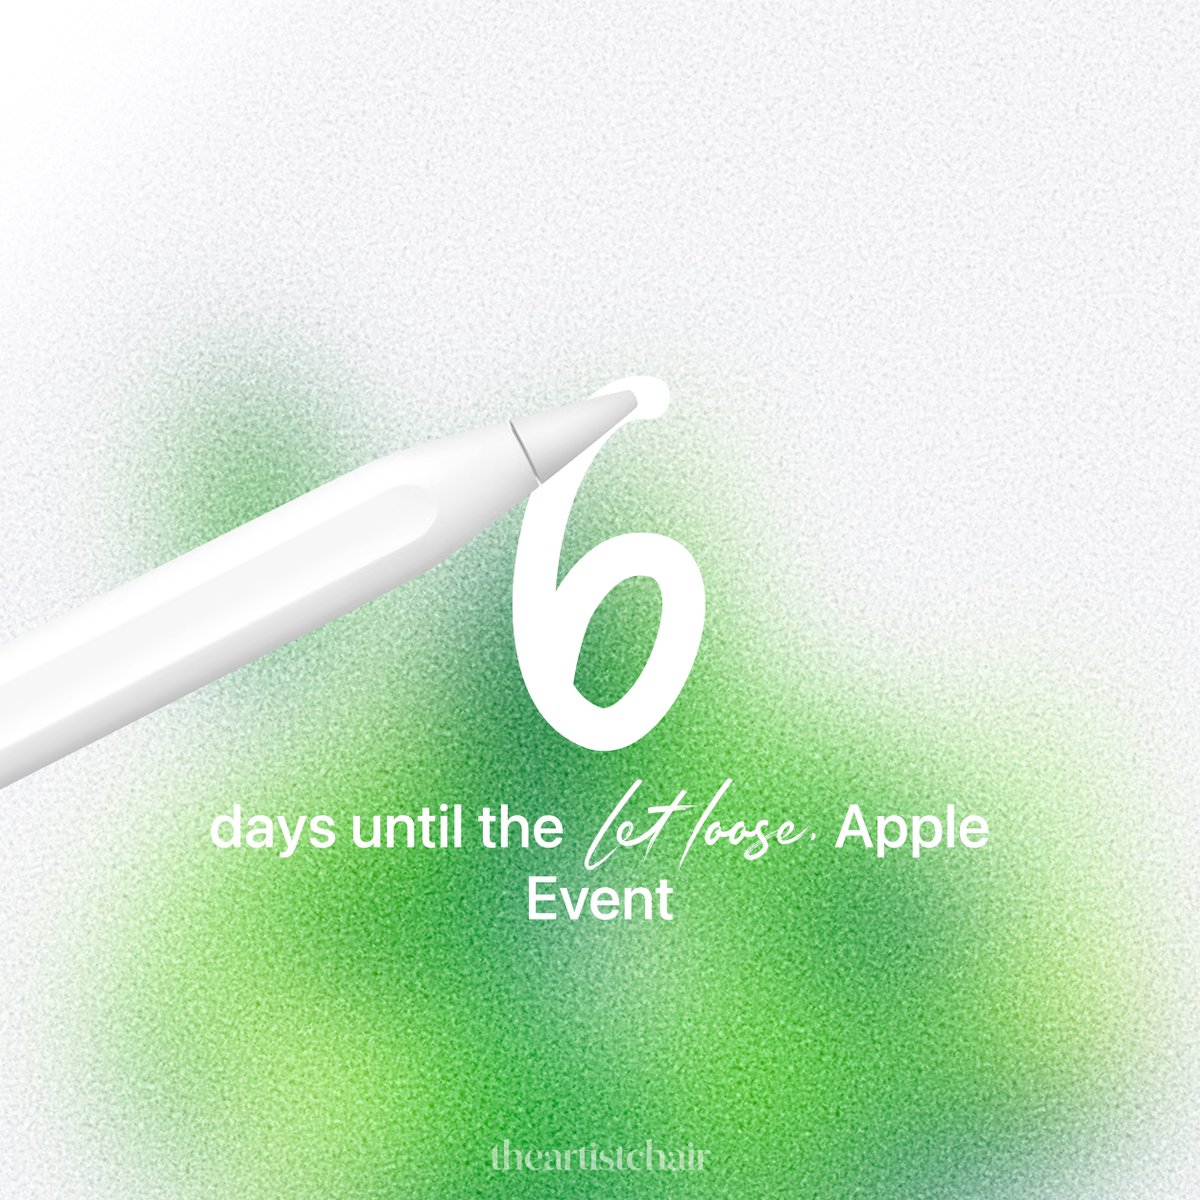 6 days until the #AppleEvent